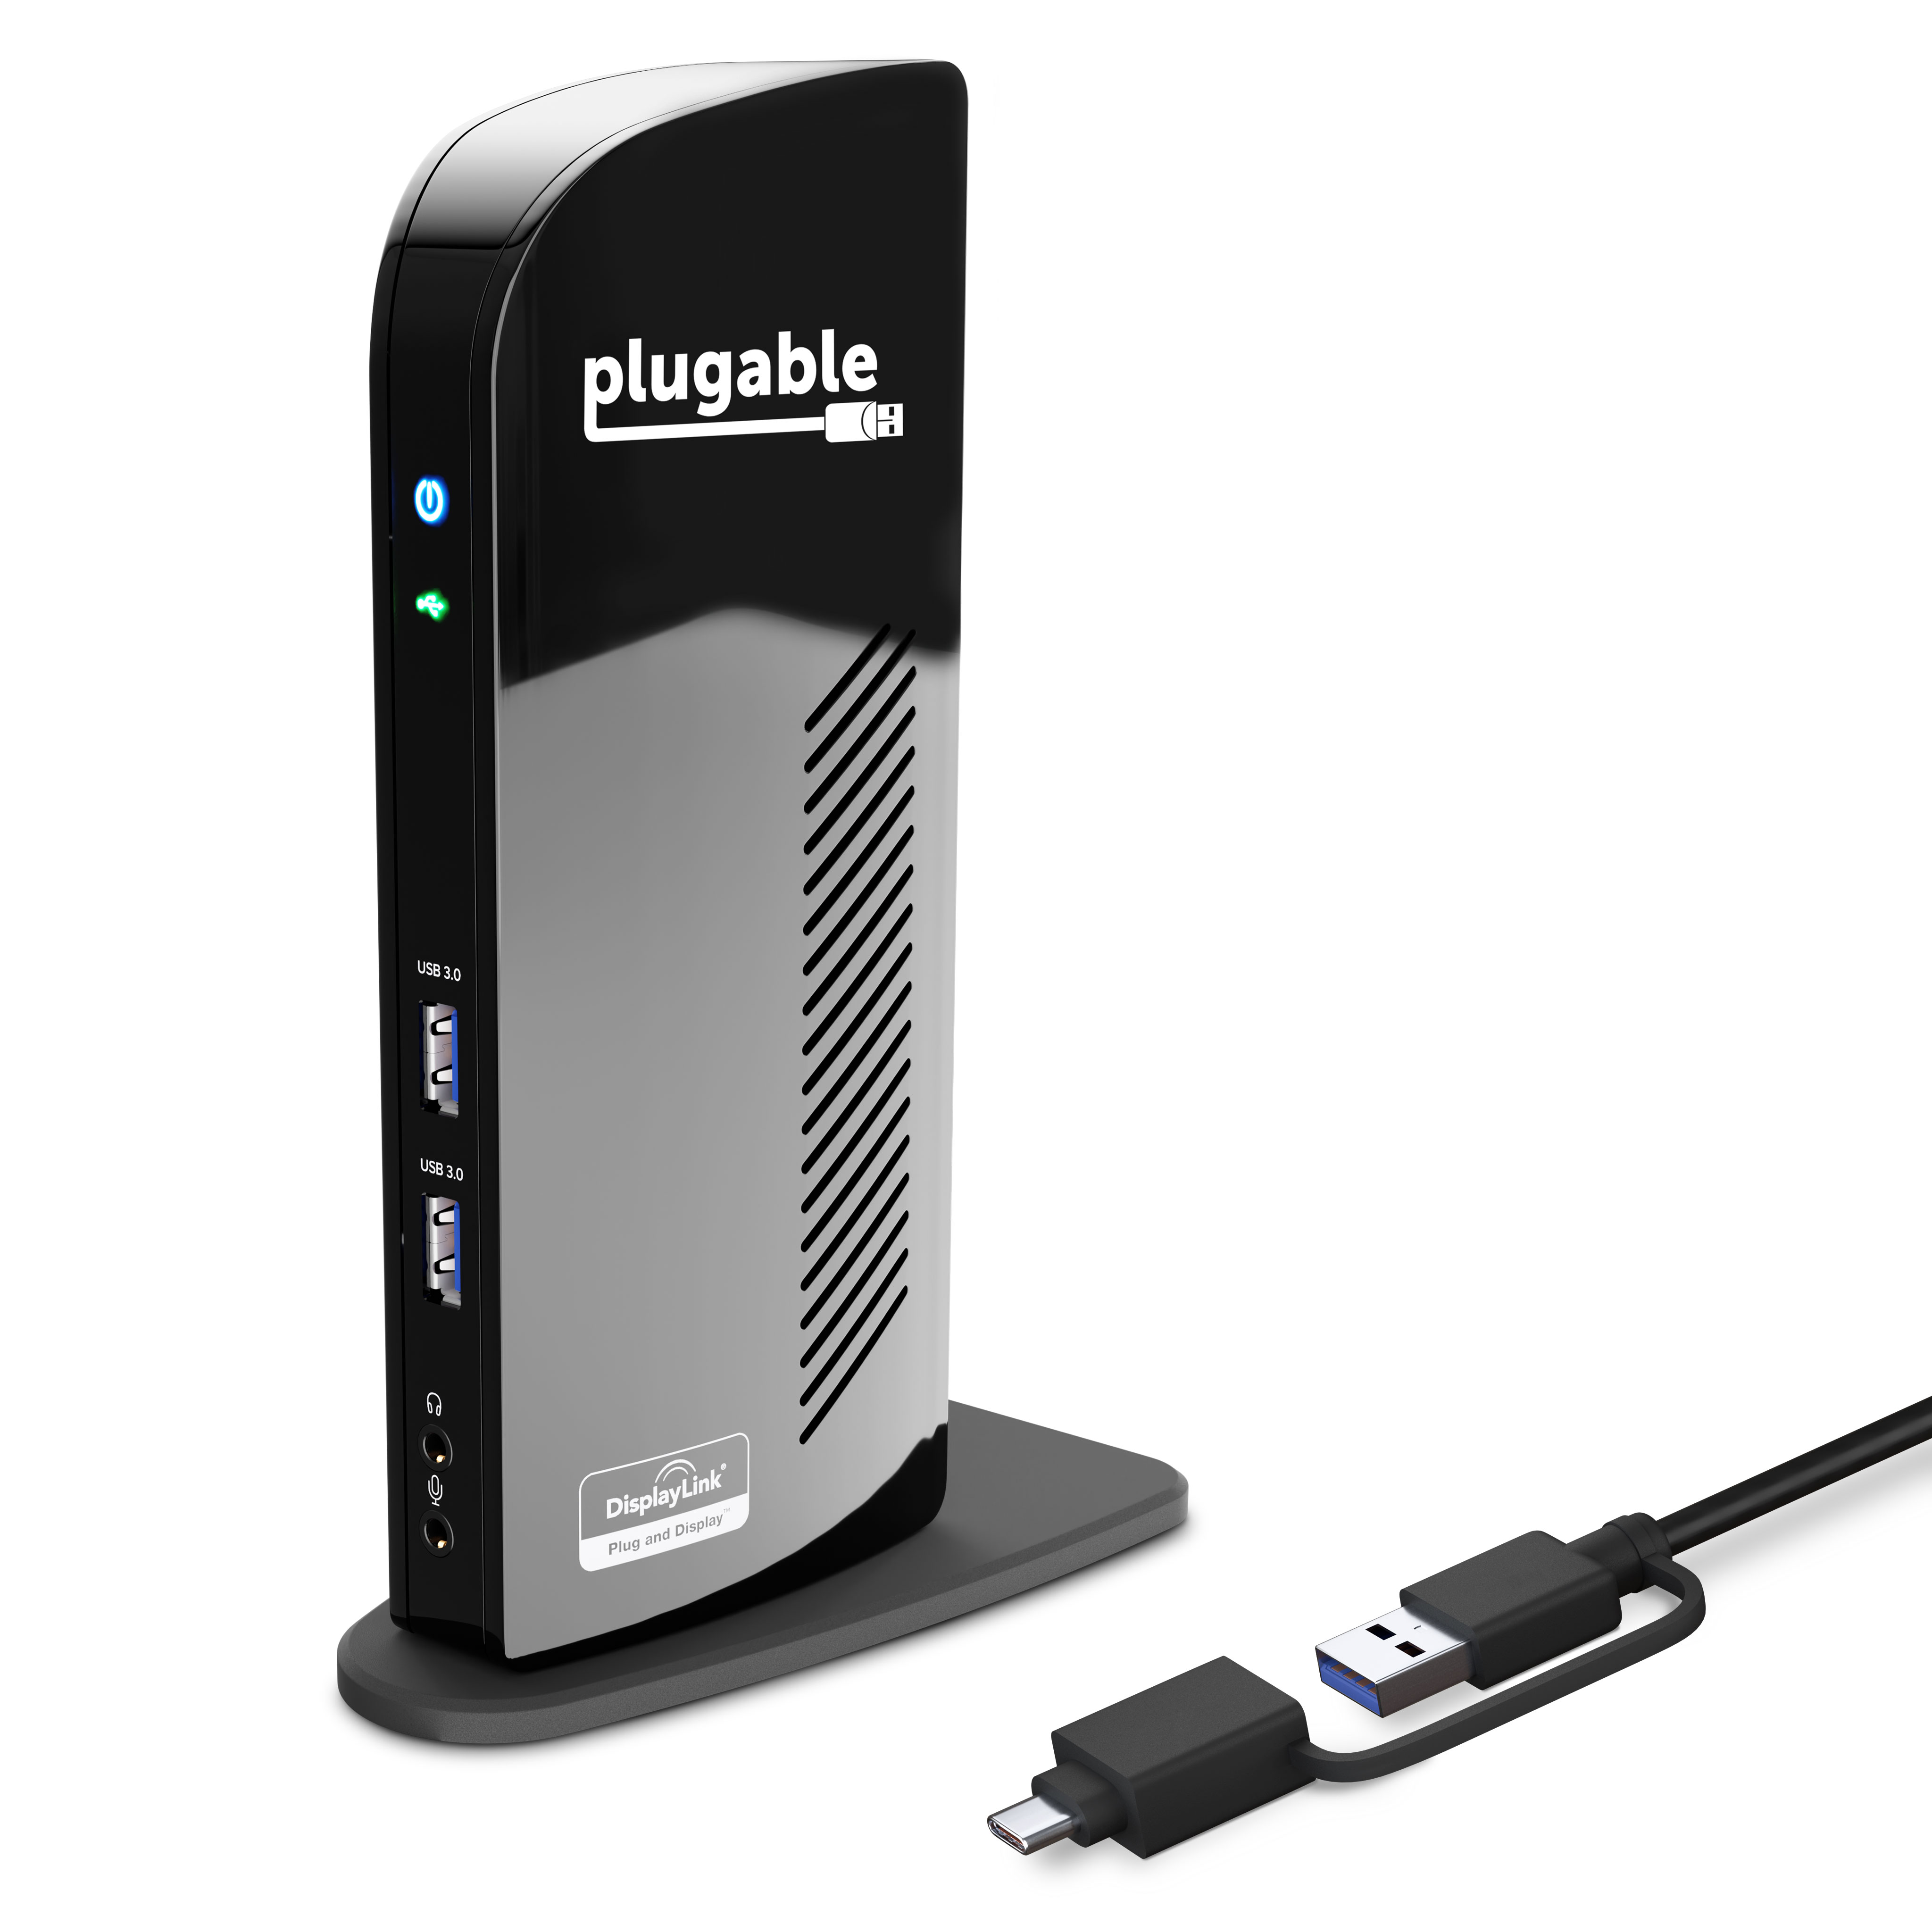 Plugable Laptop Docking Station Dual Monitor for USB-C or USB 3.0, Compatible with Windows and Mac, (Dual HDMI, 6x USB Ports, Gigabit Ethernet, Audio) - image 1 of 7